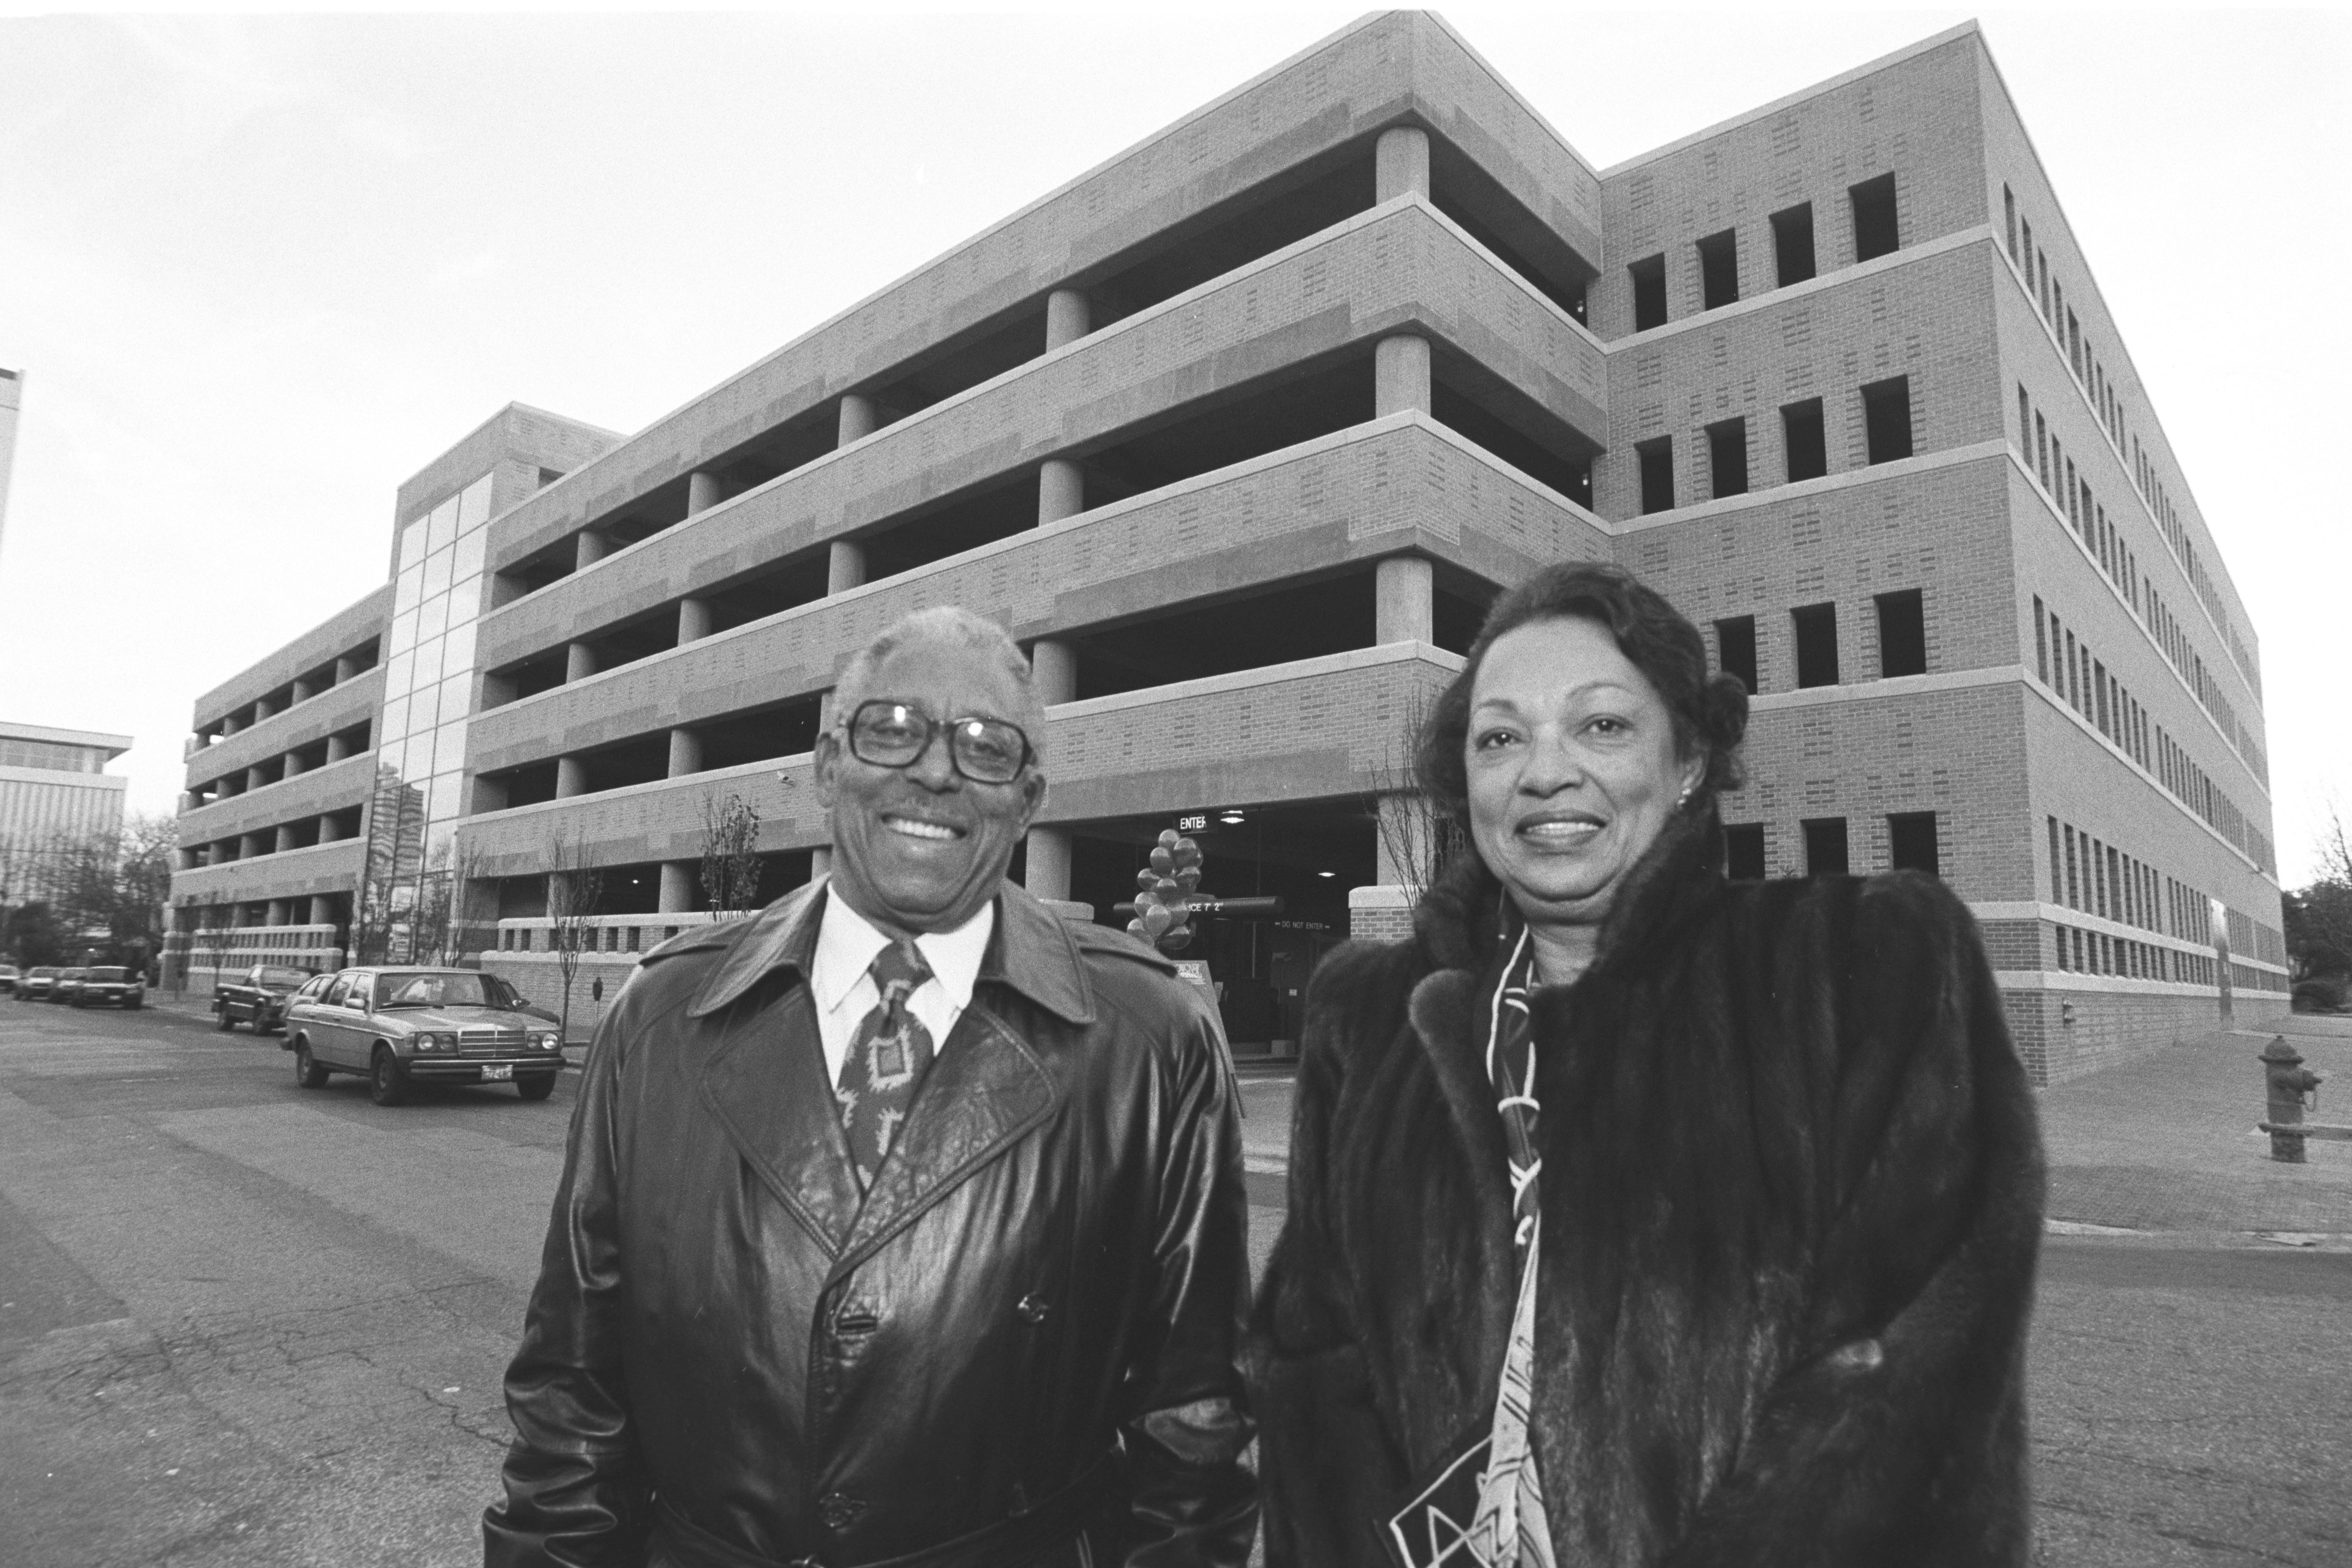 John Chase with his wife posing in front of the UT Austin San Antonio parking garage, which he designed.